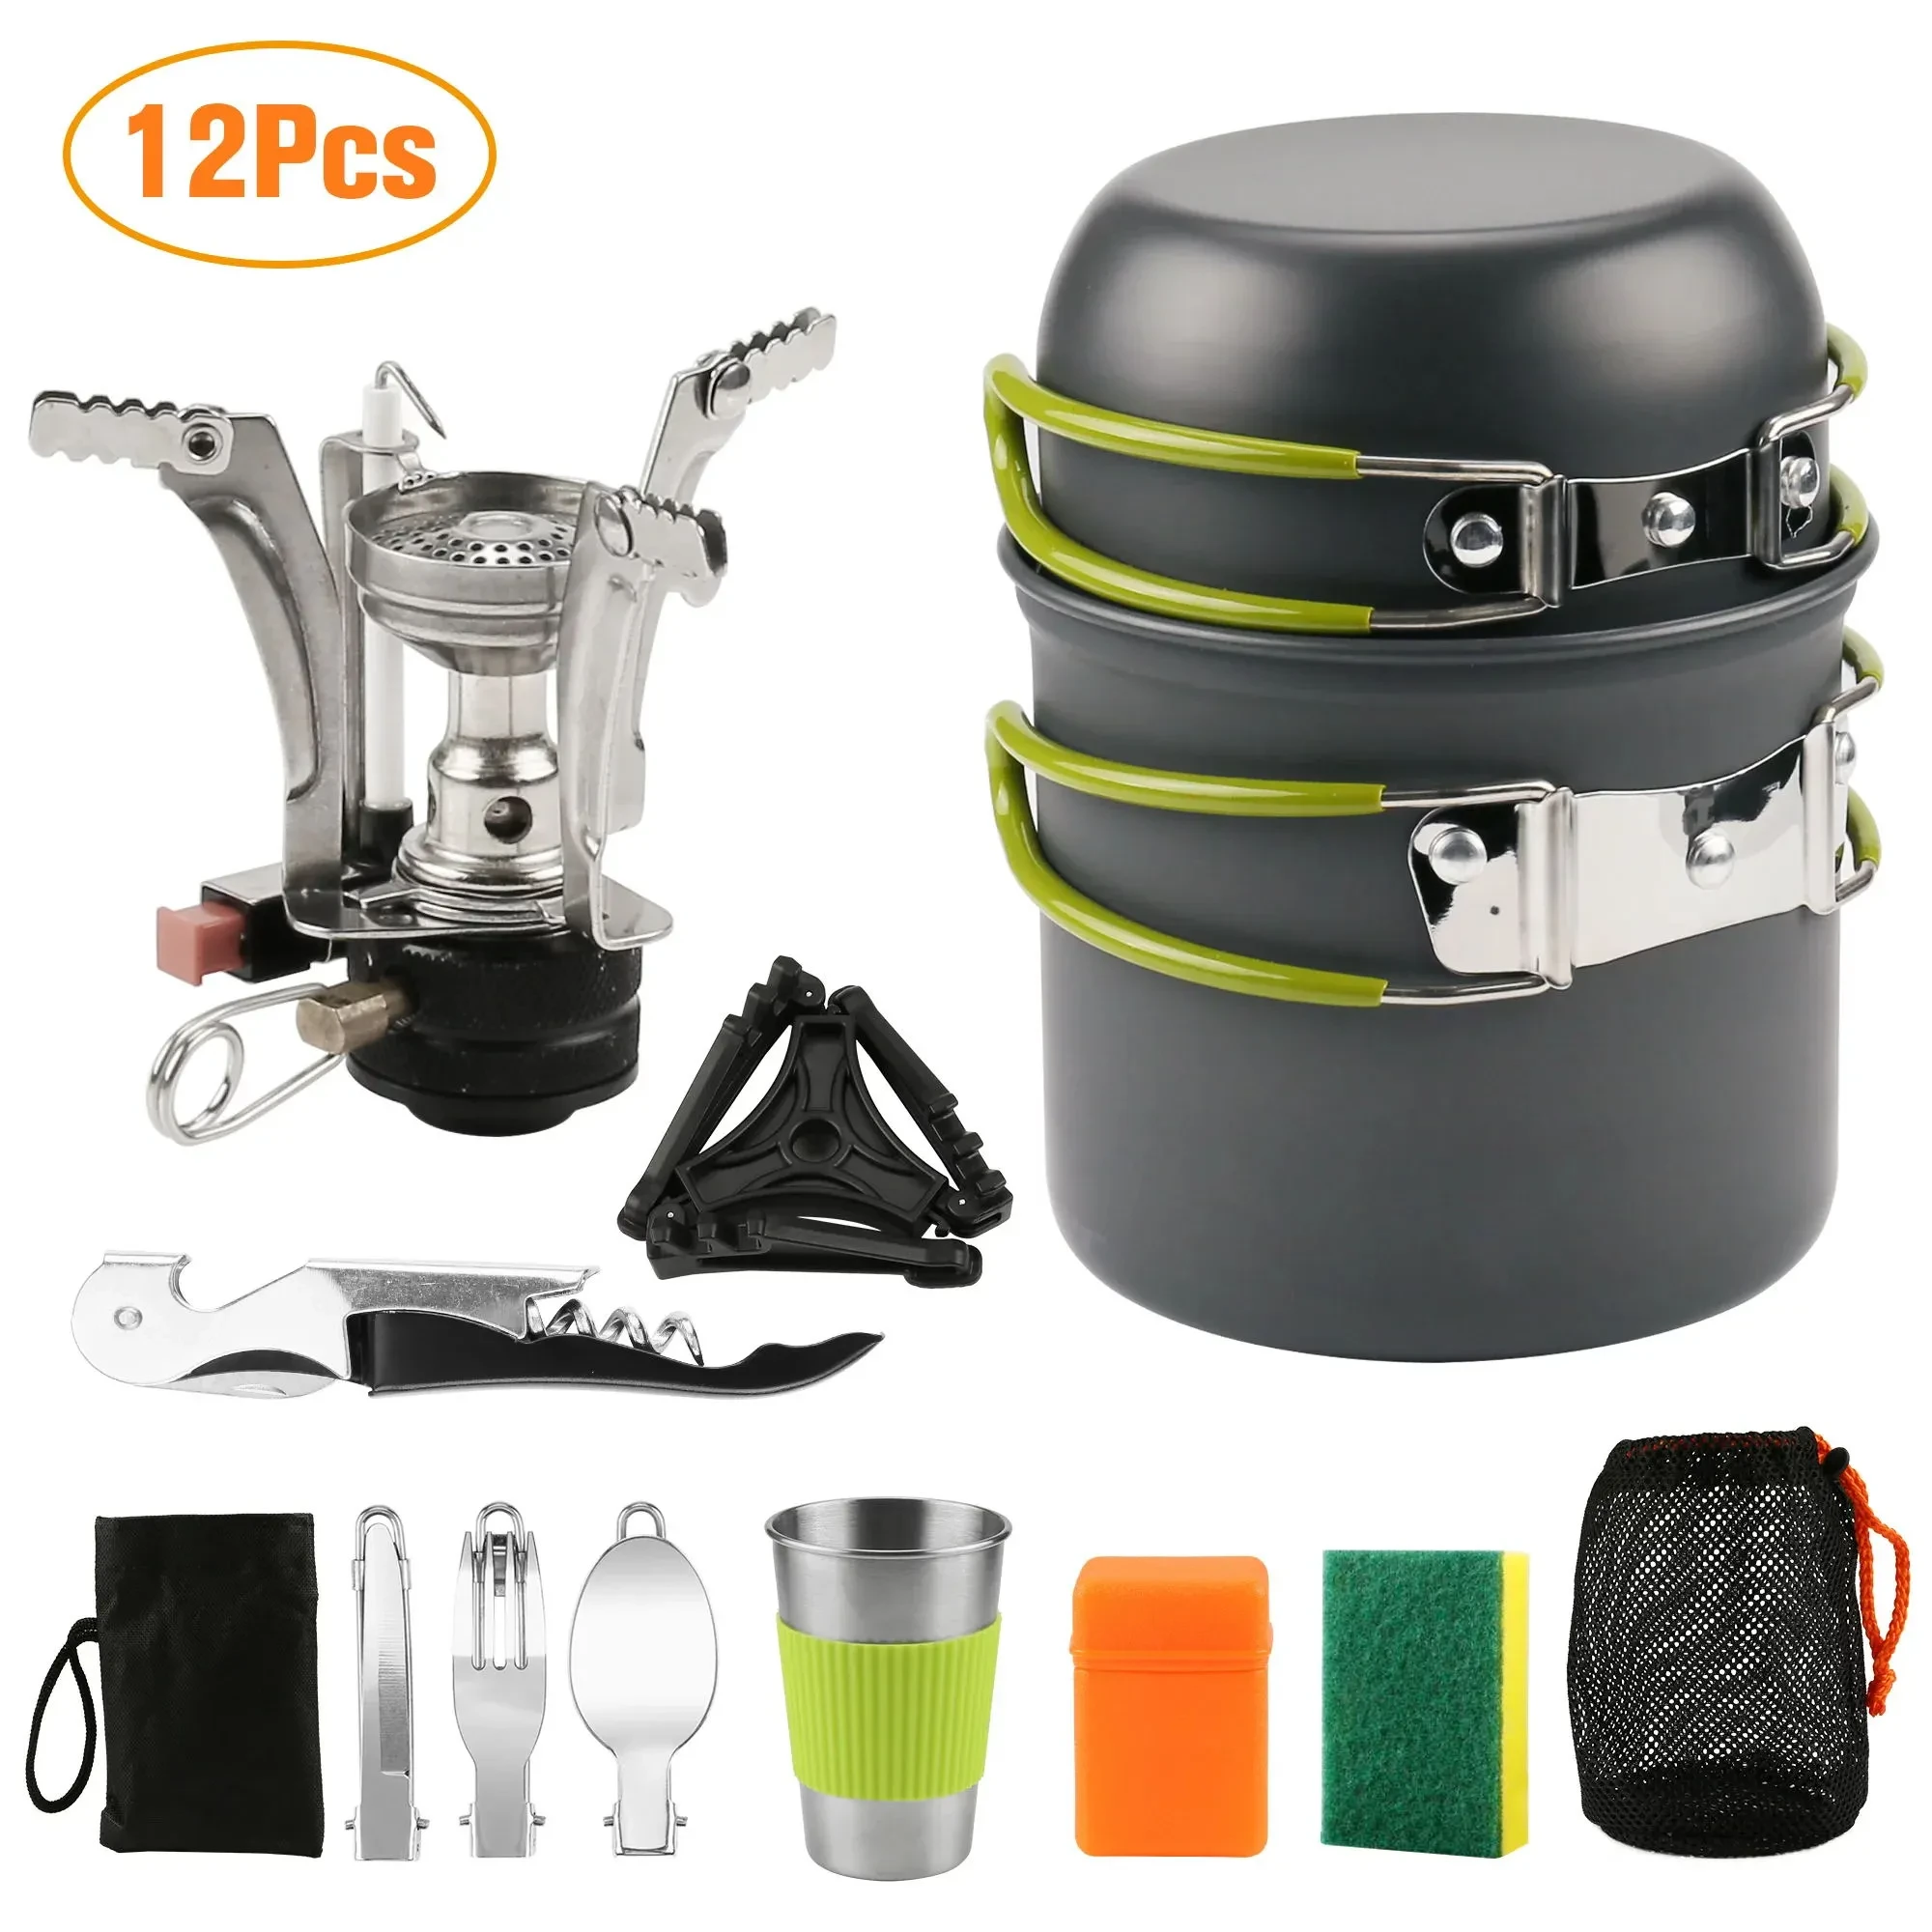 Odoland 4L Camping Kettle Set with 4 Cups Durable Stainless Steel Camp Tea Coffee Water Pot with 4 Mugs for Hiking Backpacking Outdoor Camping and Pi